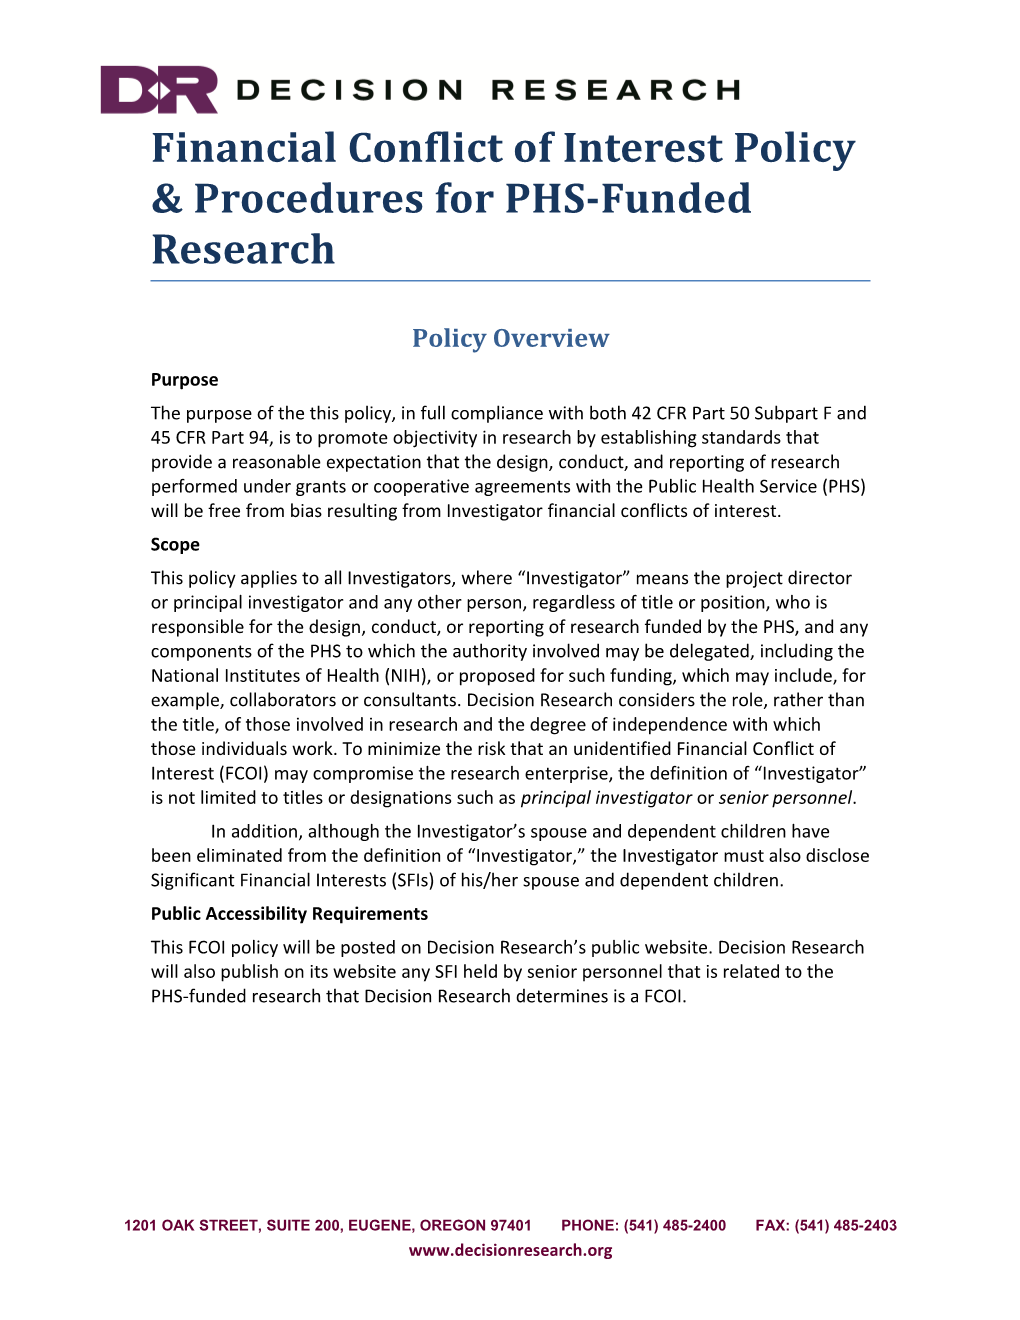 Financial Conflict of Interest Policy & Procedures for PHS-Funded Research